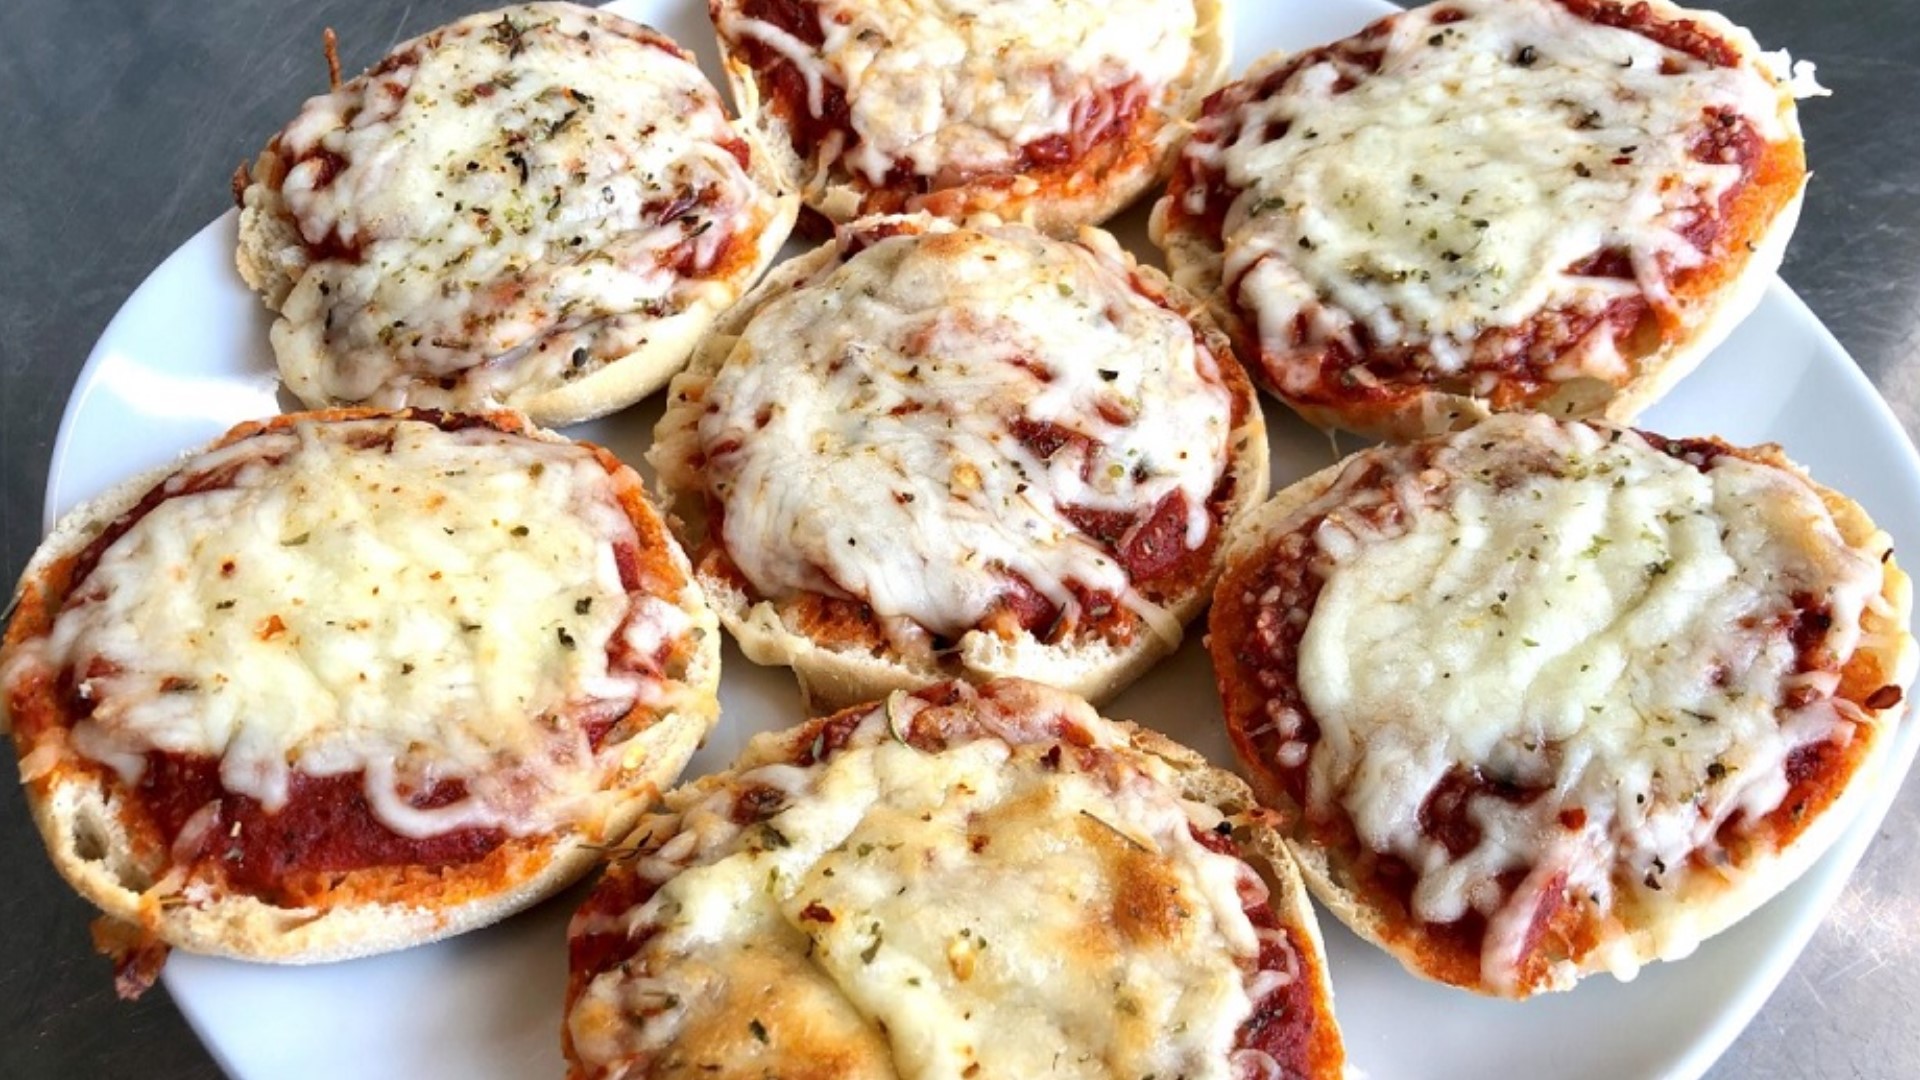 These mini cheese pizzas are a quick, easy and delicious meal.